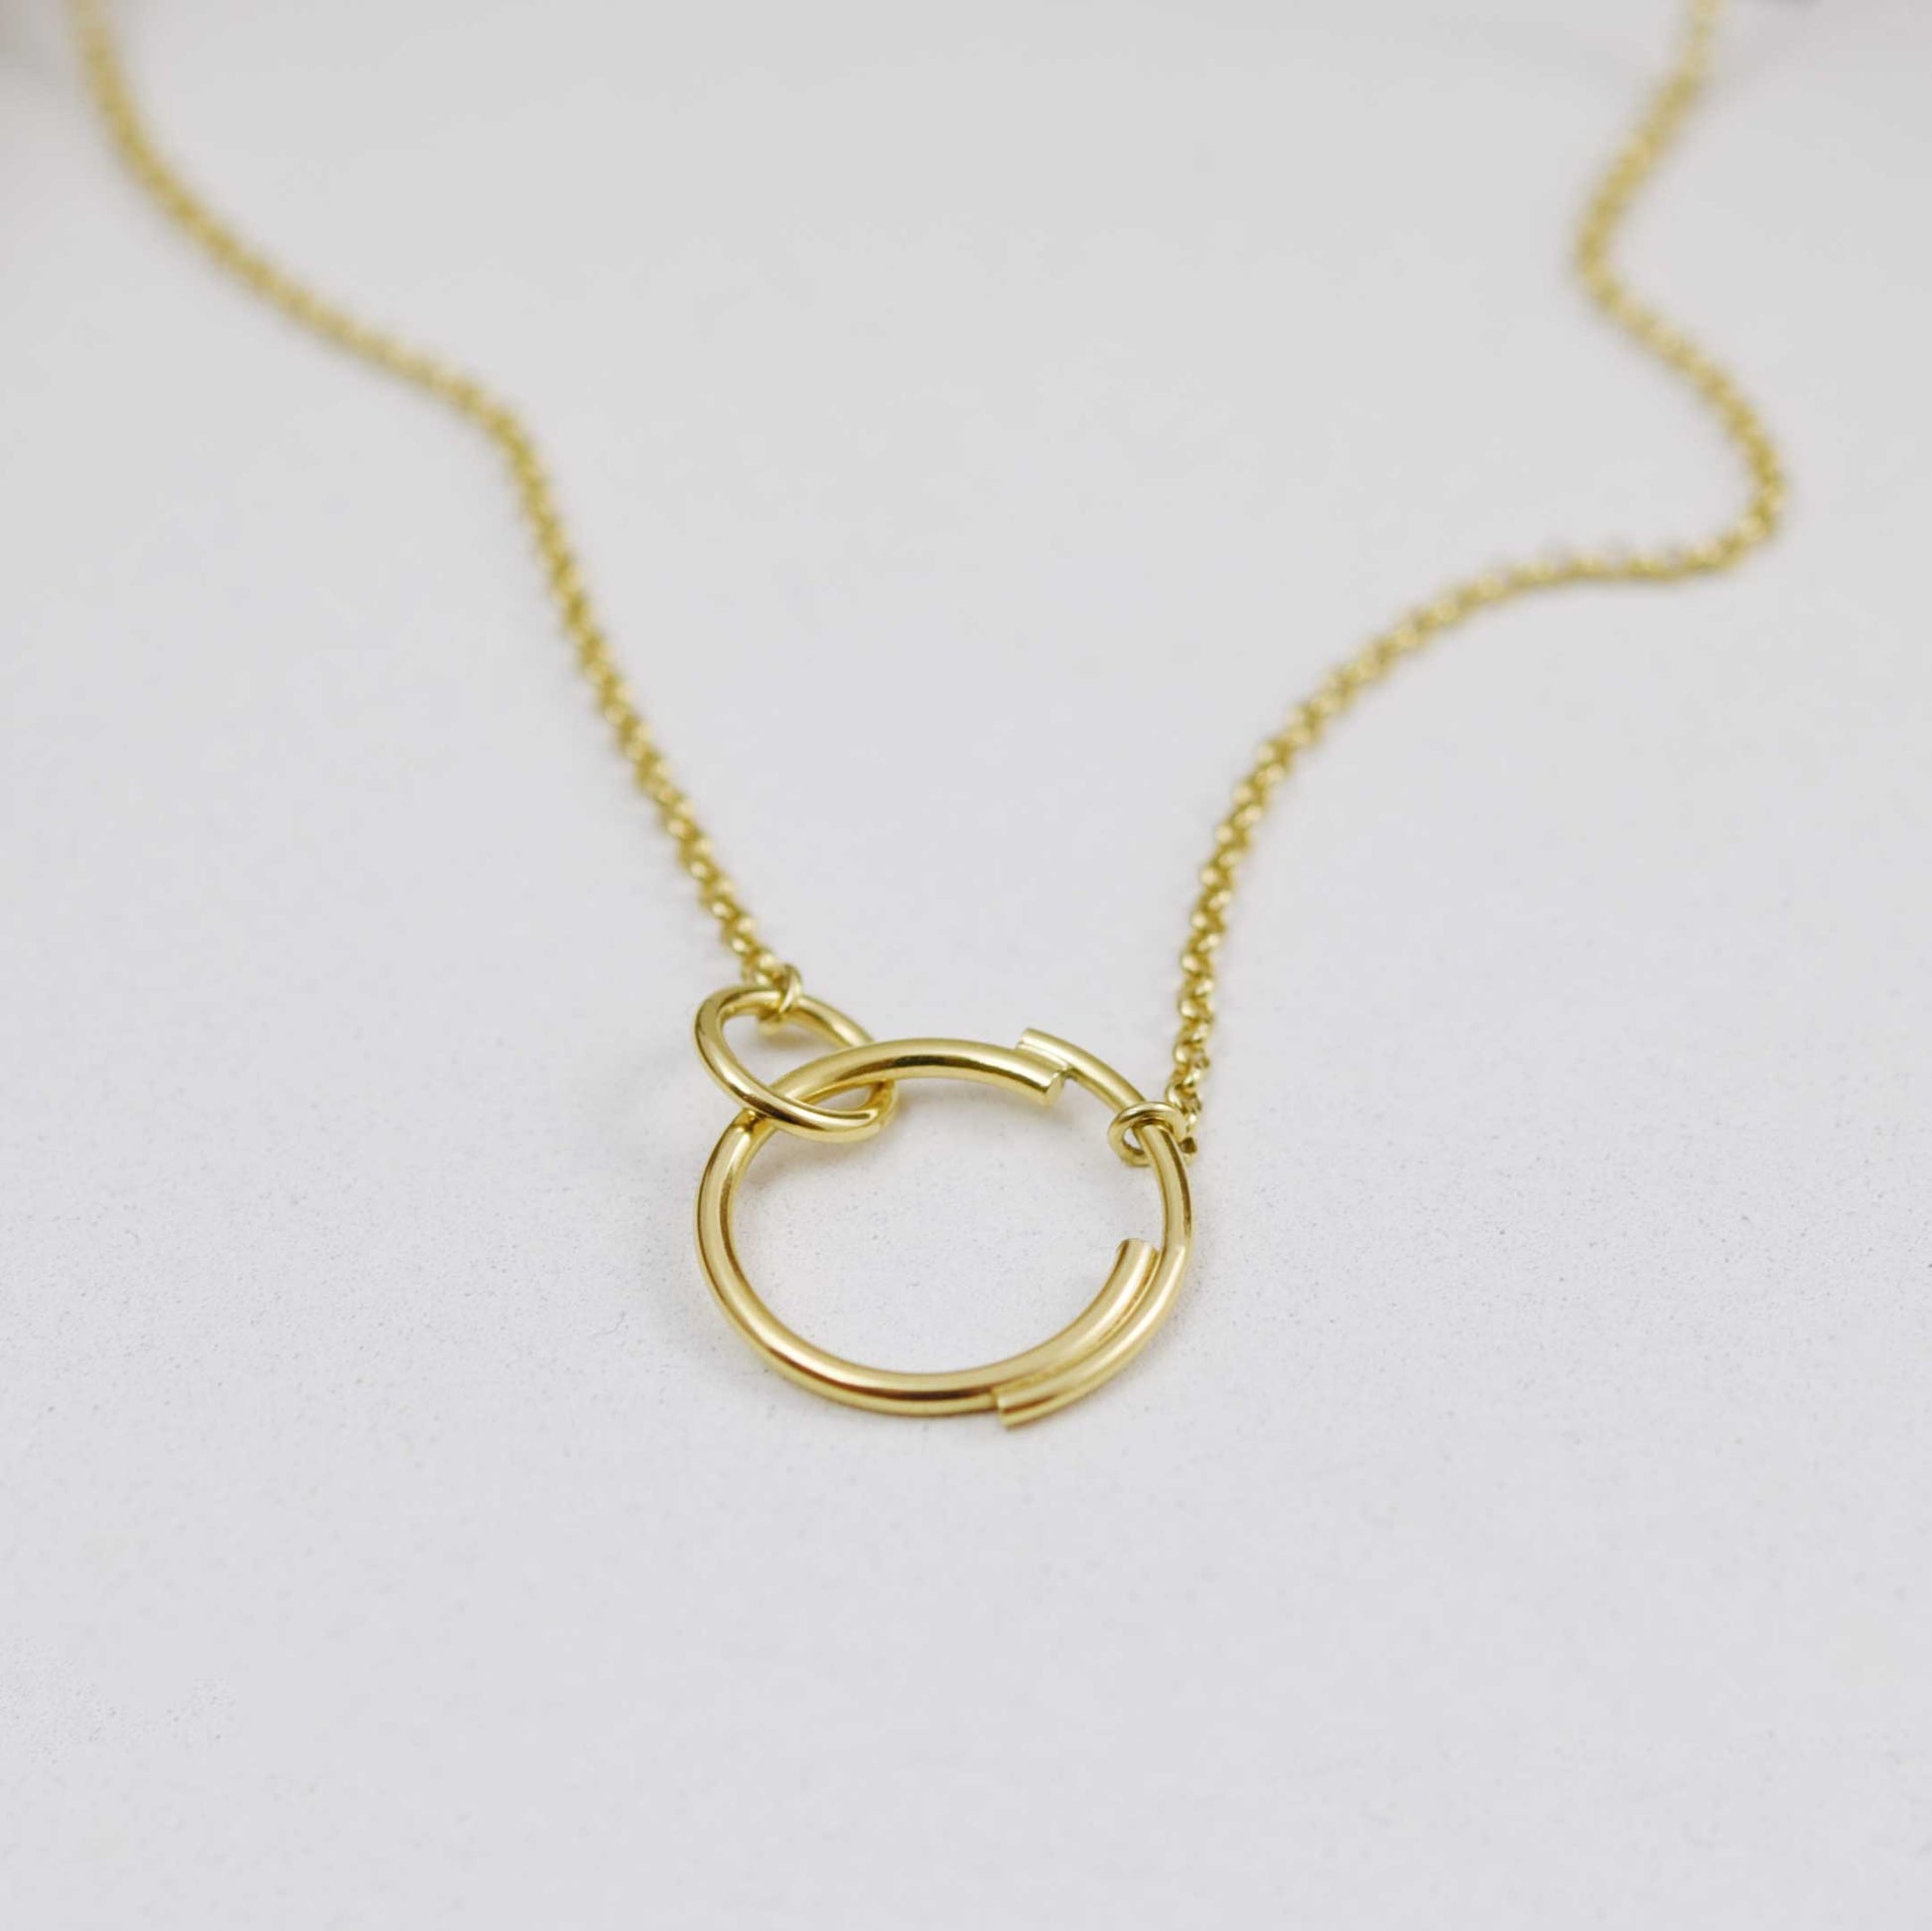 A close up of a stylish interlocking circle necklace  in gold that features a small circle clasping onto a larger circle that is made up of two separate arcs for a truly eclectic design.